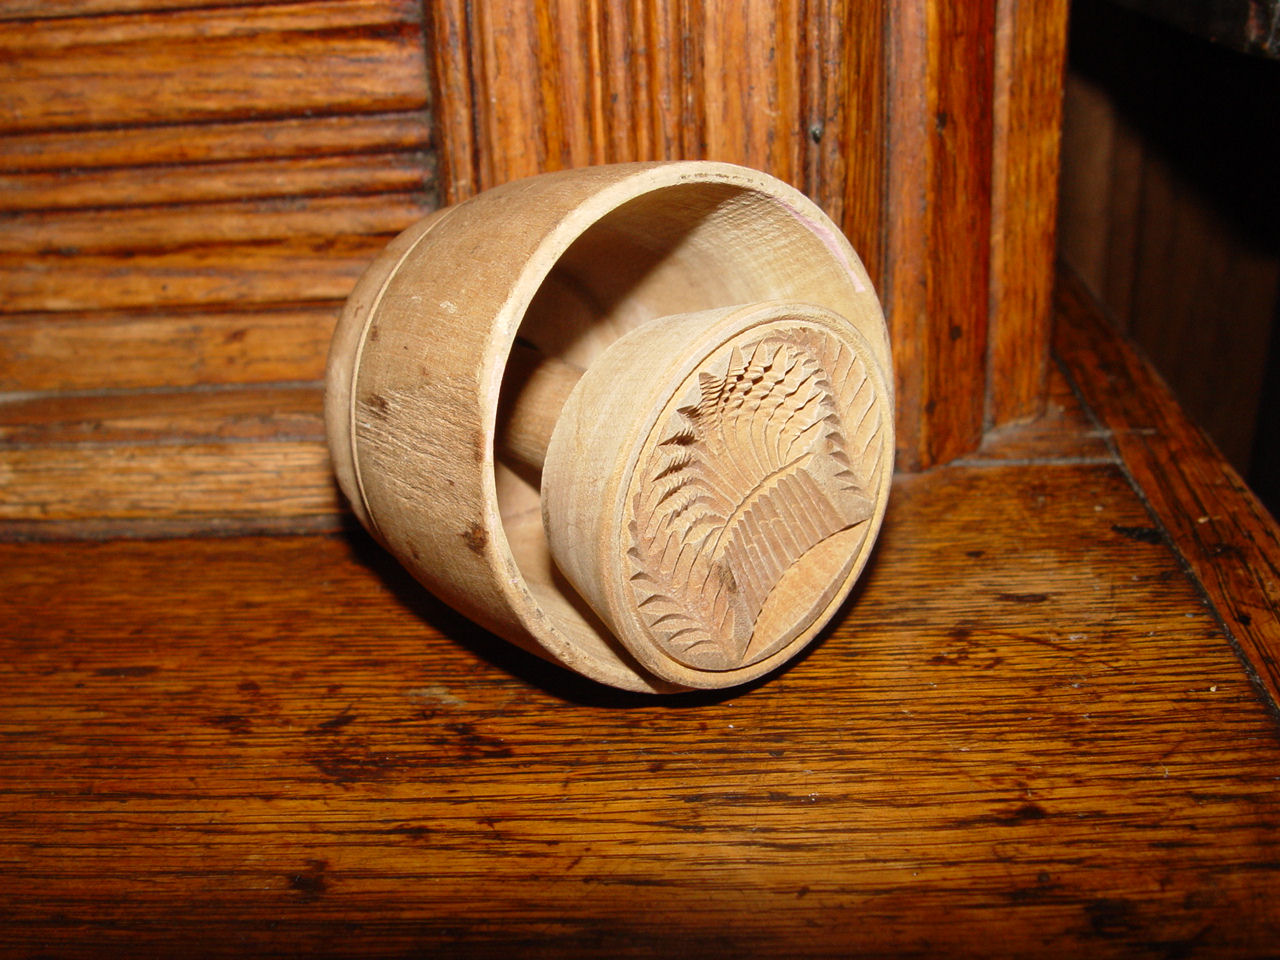 Primitive
                        Wooden Butter Mold Stamp, Wheat Sheaf PAT. 1866